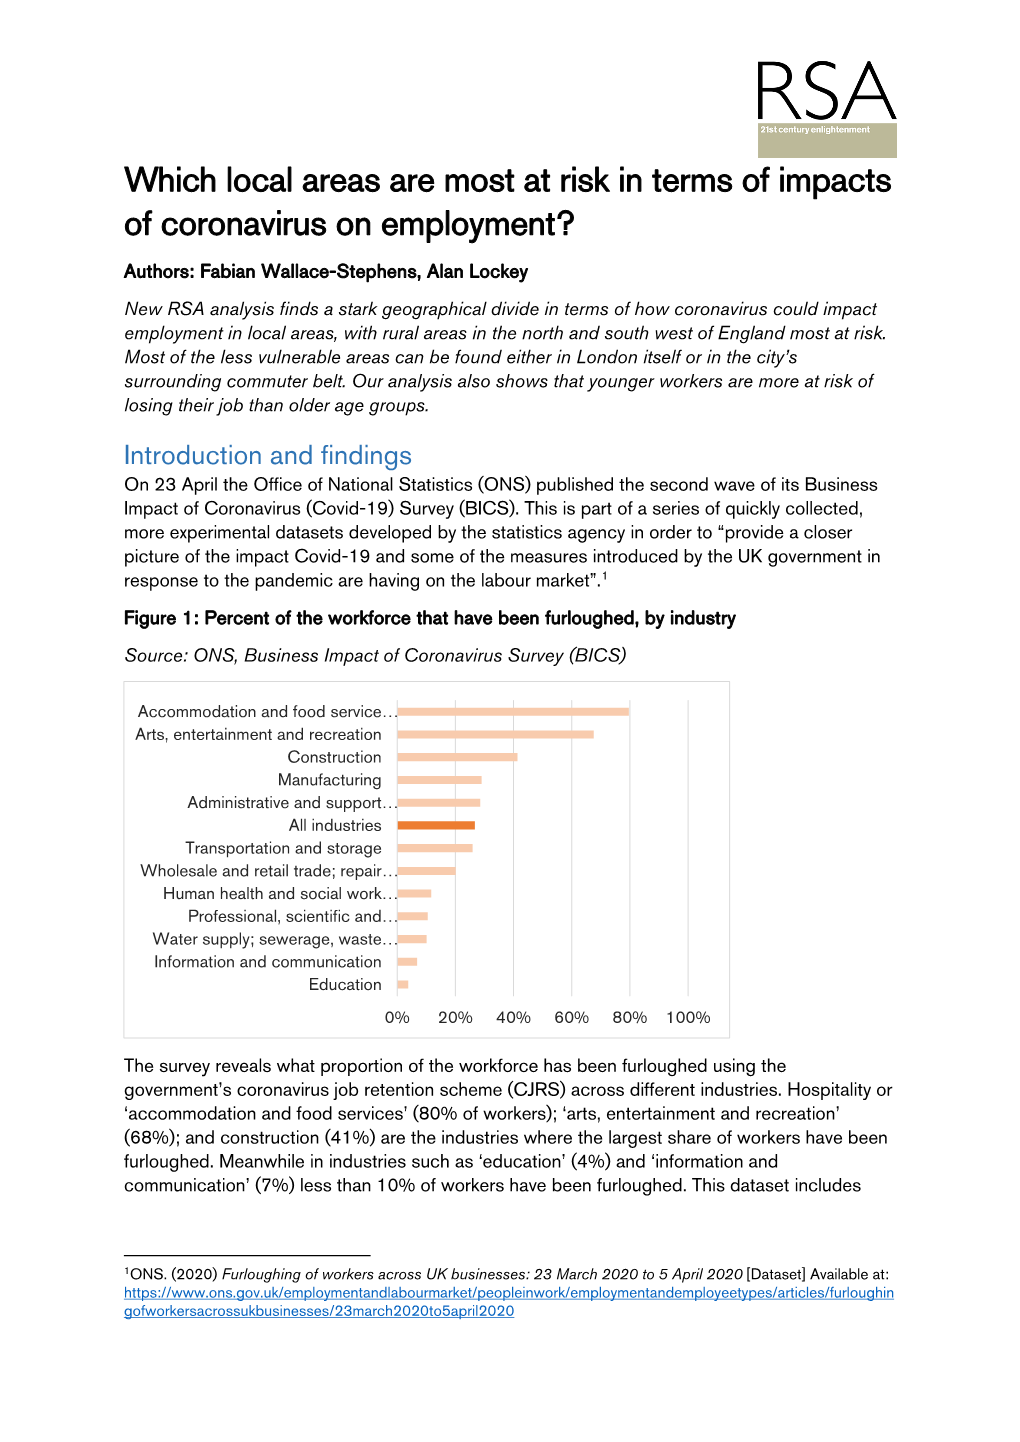 Which Local Areas Are Most at Risk in Terms of Impacts of Coronavirus on Employment?